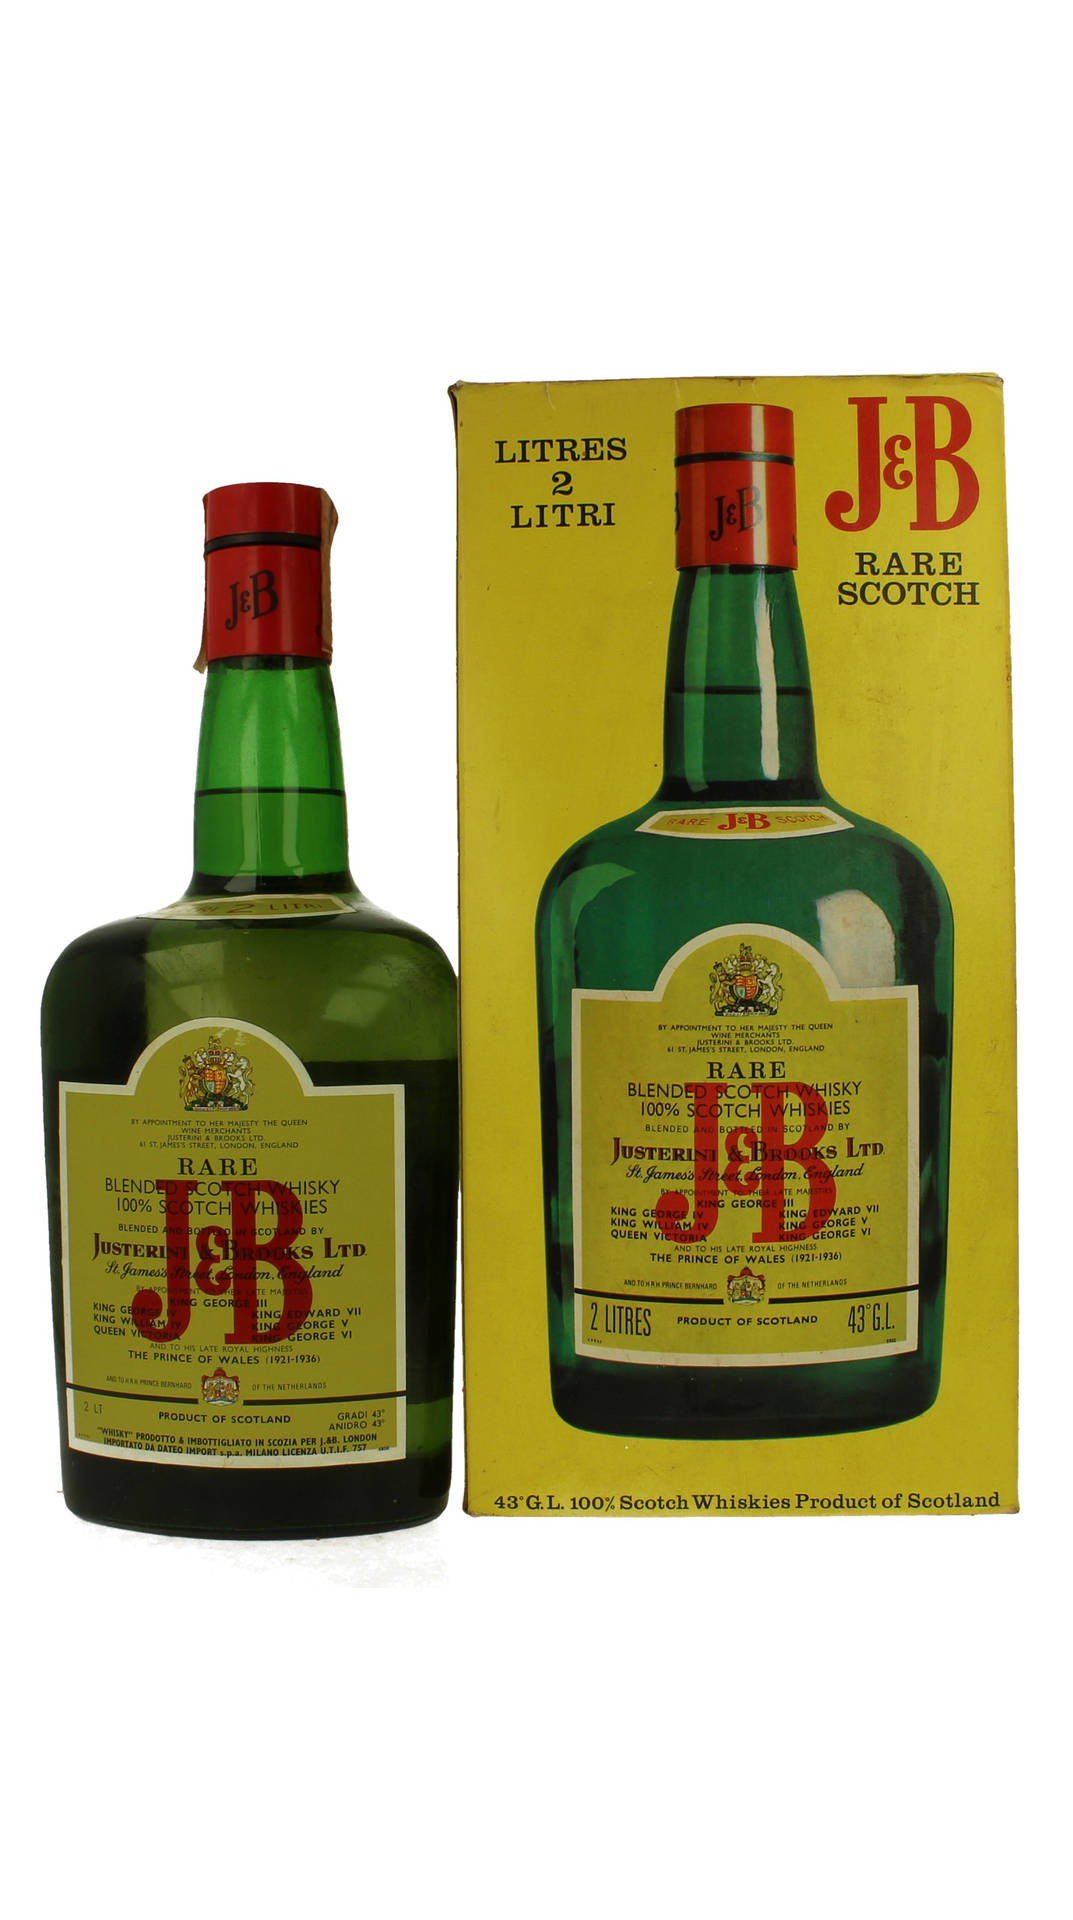 J&b Rare Bottle In The 60's And 70's Wallpaper